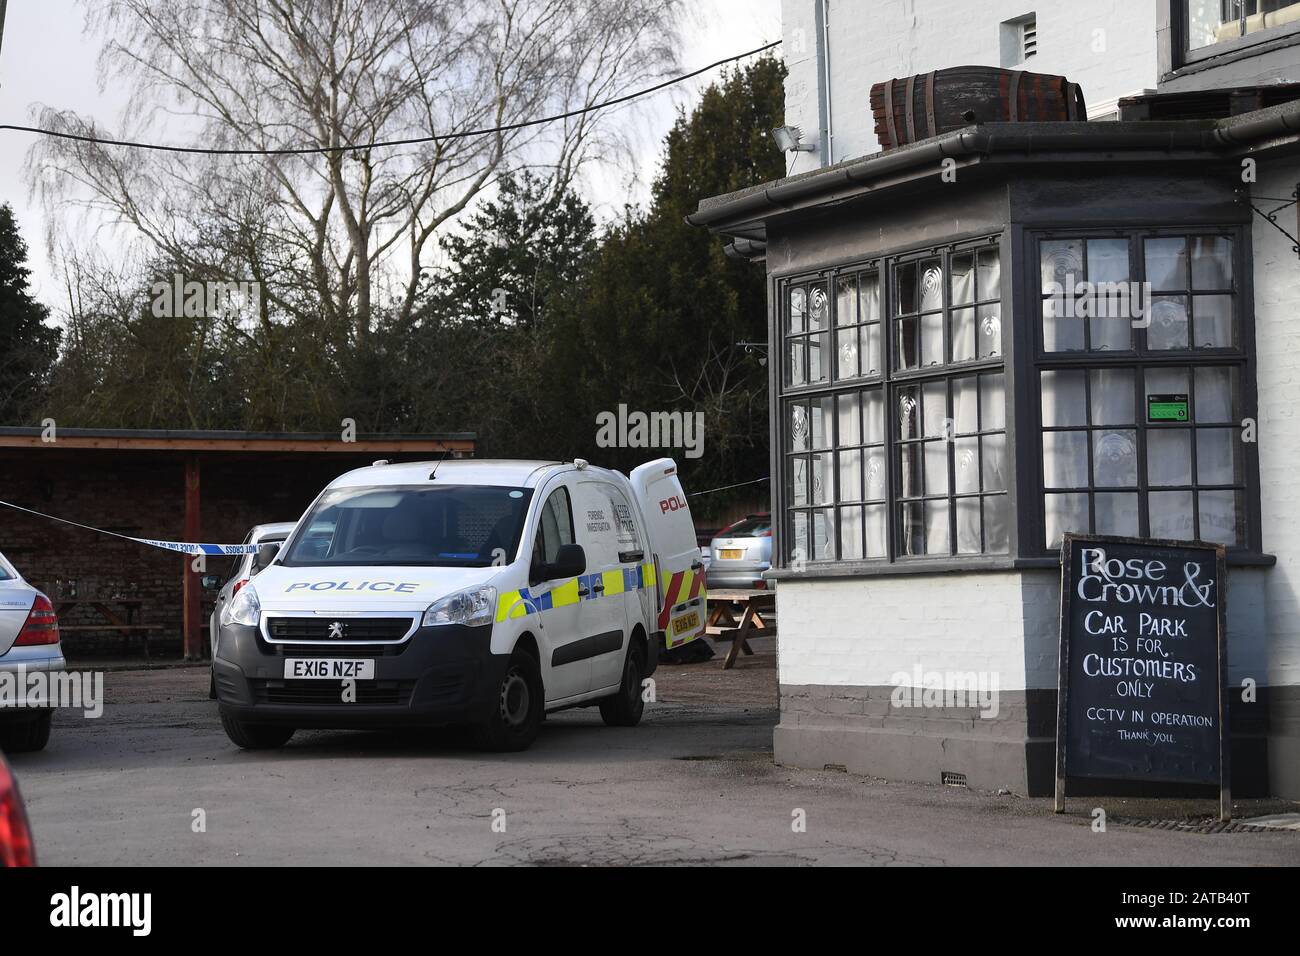 Police outside the Rose and Crown pub in Writtle, Essex, after a man, named locally as Liam Taylor 19, was fatally stabbed outside the pub on Friday. Four men have been arrested on suspicion of murder following the assault. Stock Photo